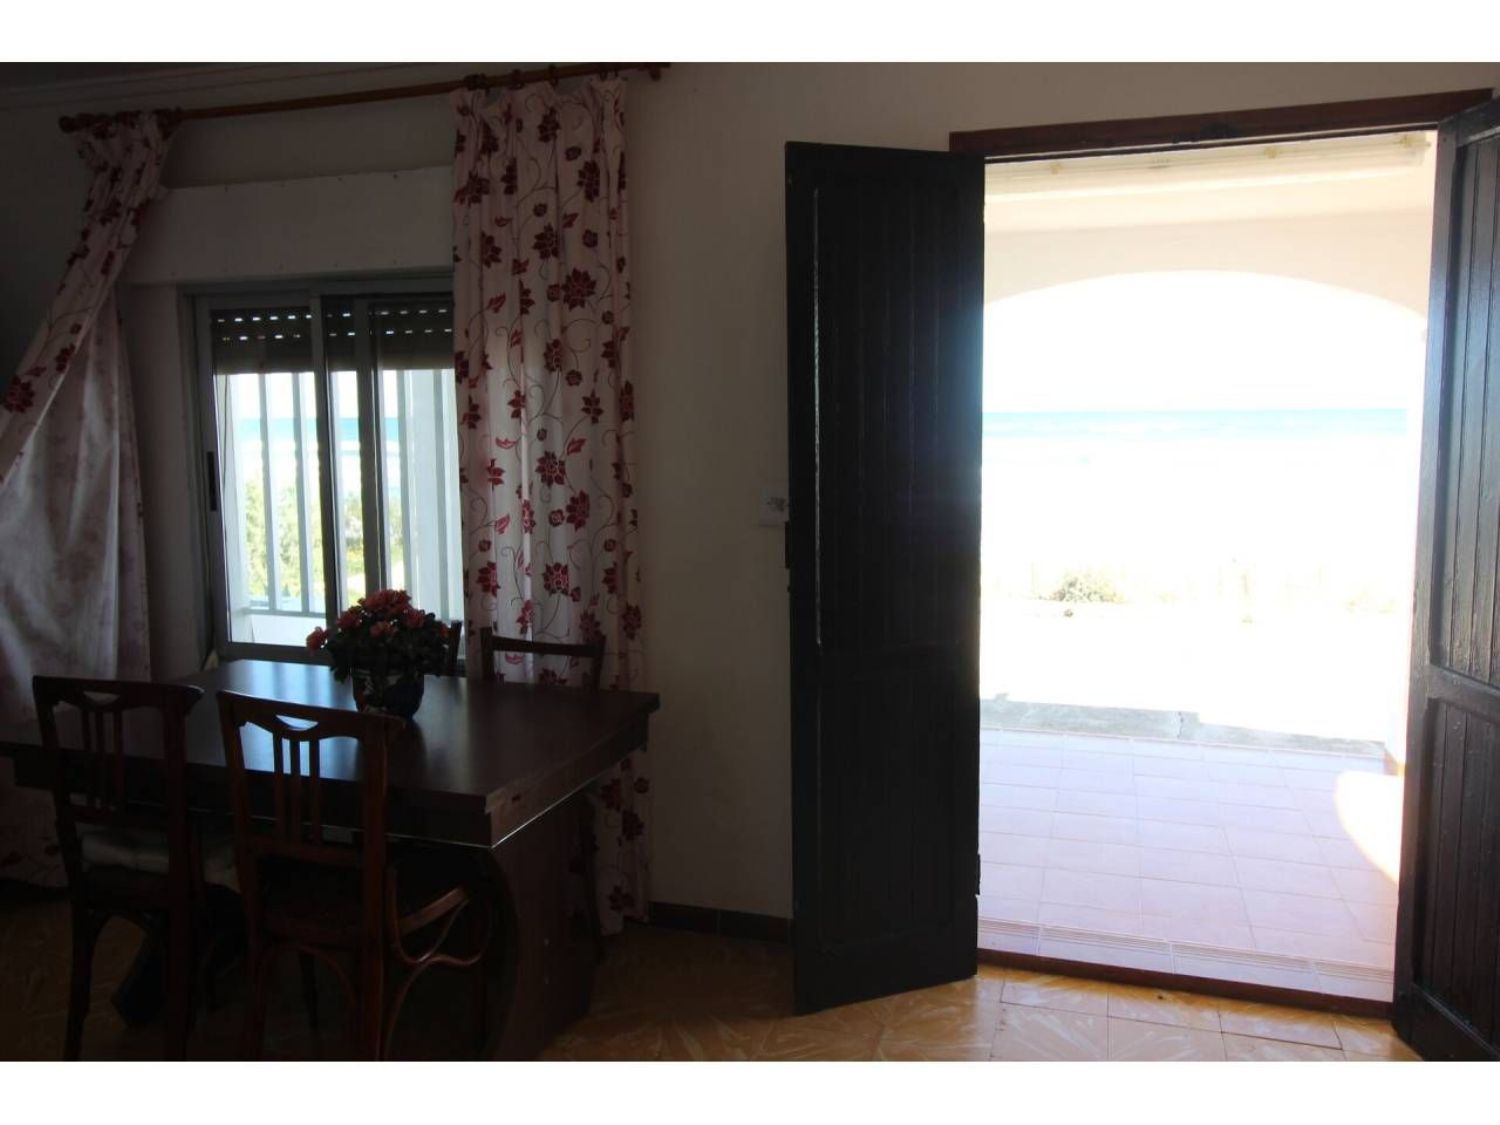 House for sale on the seafront in Devesses, in Dénia